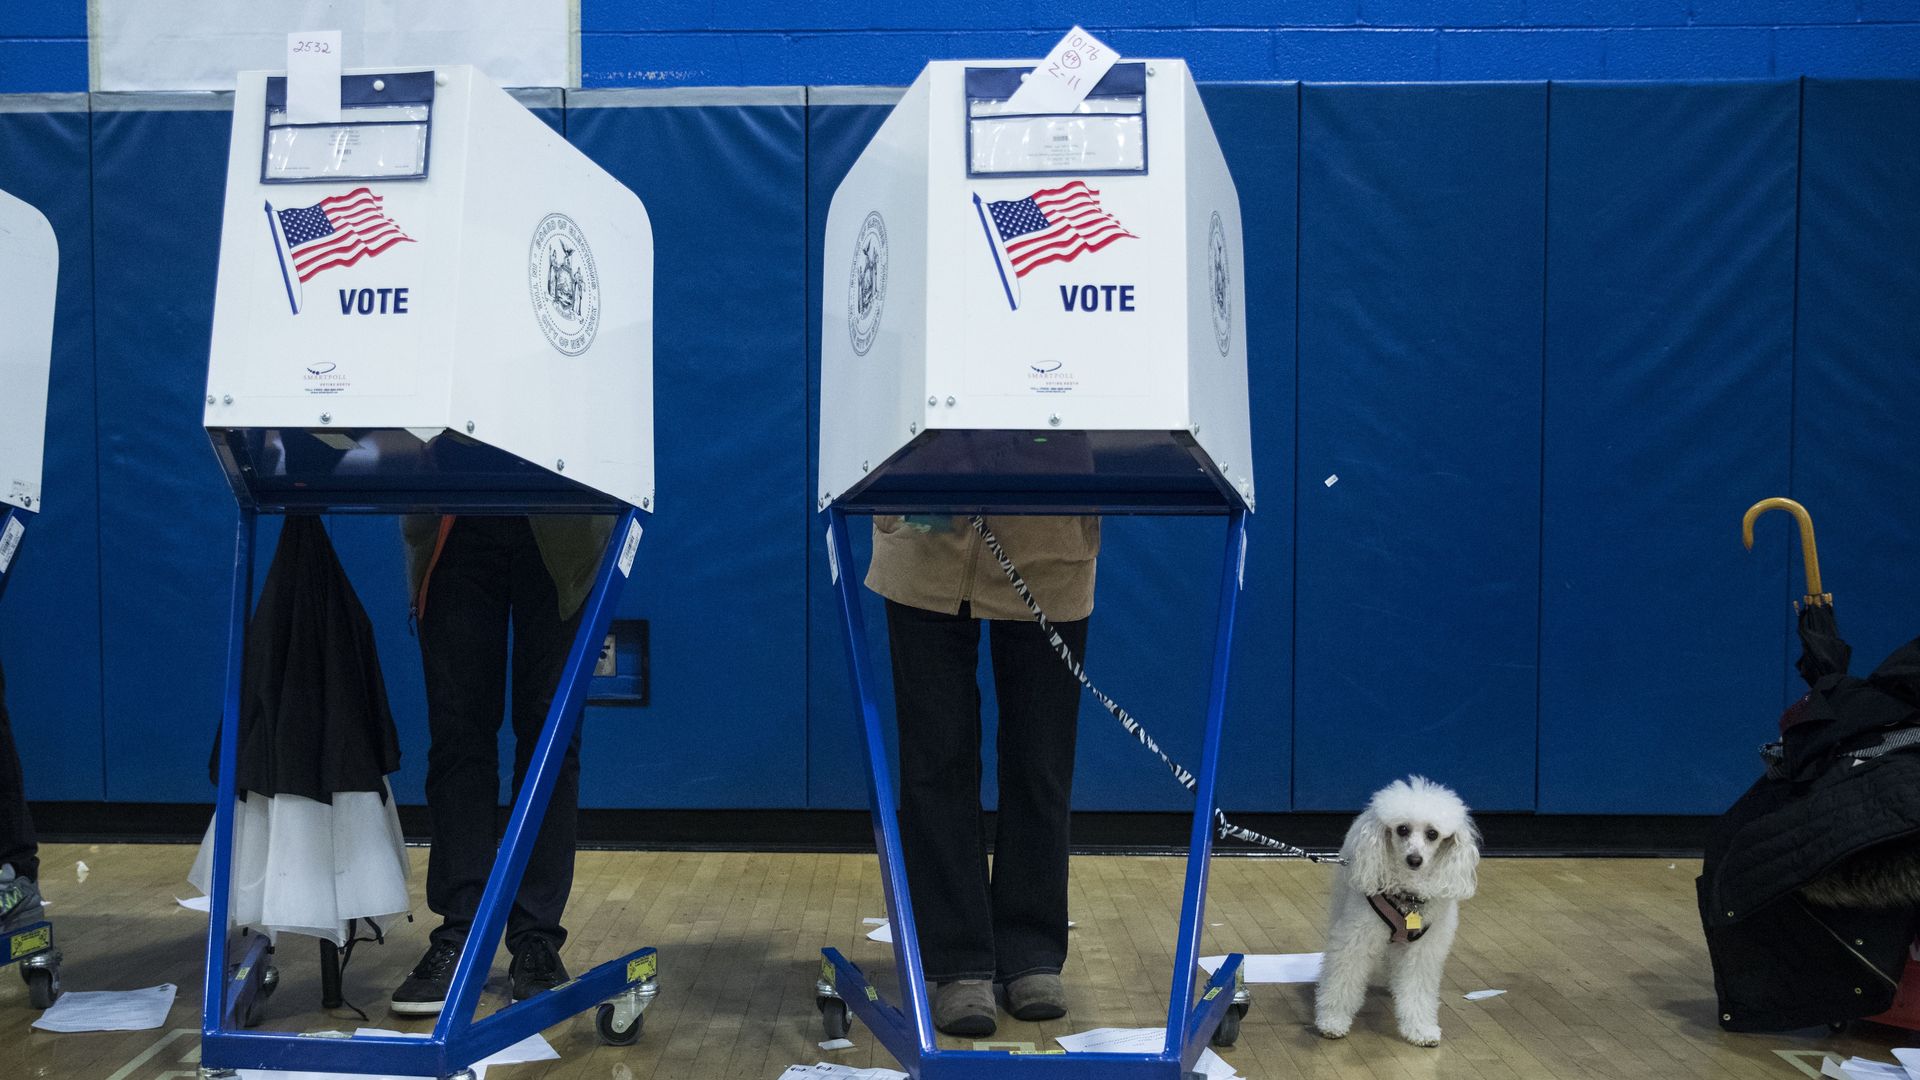 Two voting booths with people voting in them. One voter has a small, white, fluffy dog on a leash.